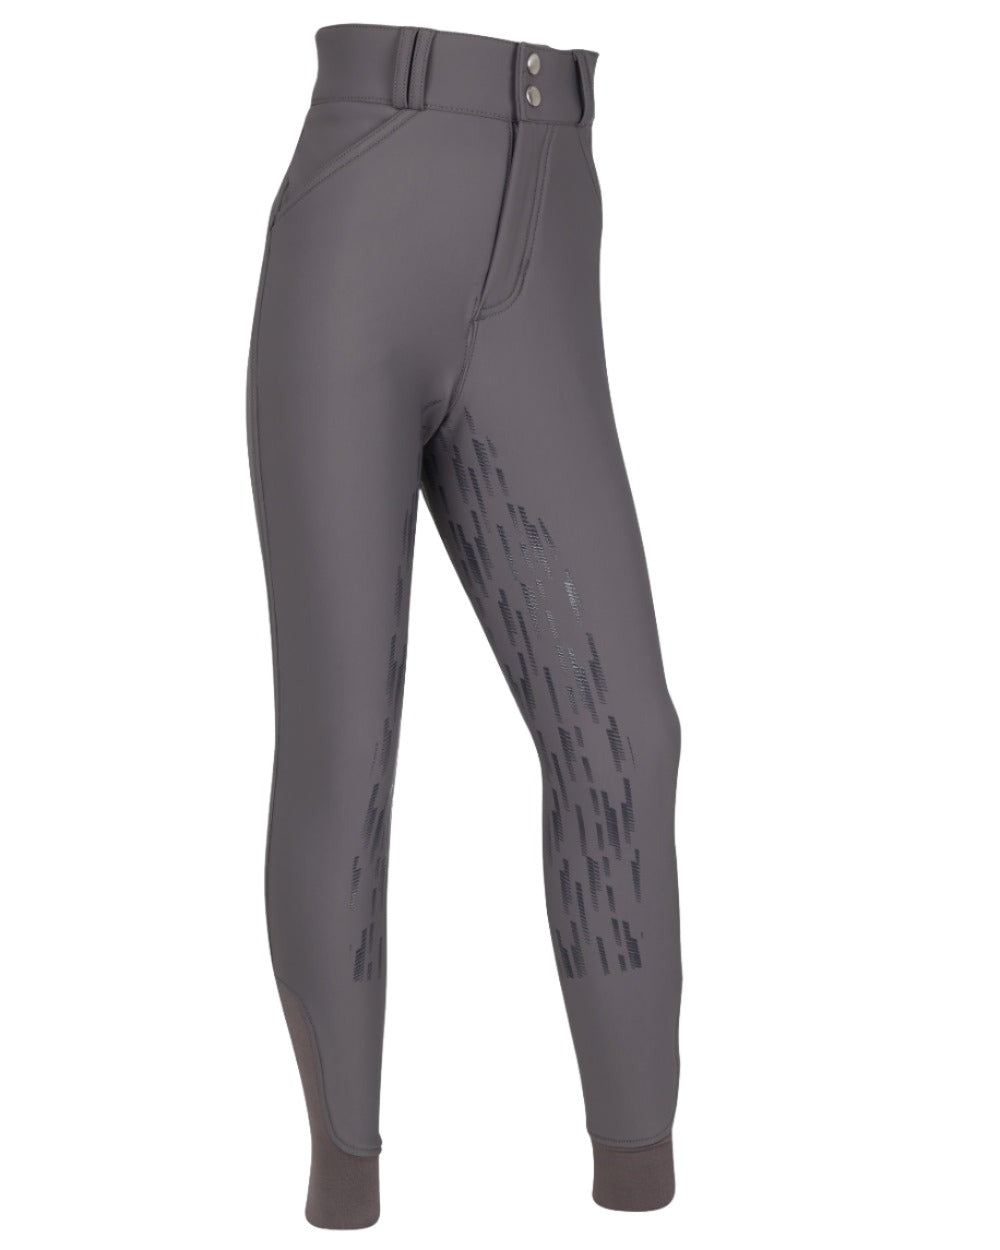 Carbon coloured LeMieux Young Rider Drytex Waterproof Breeches on white background 